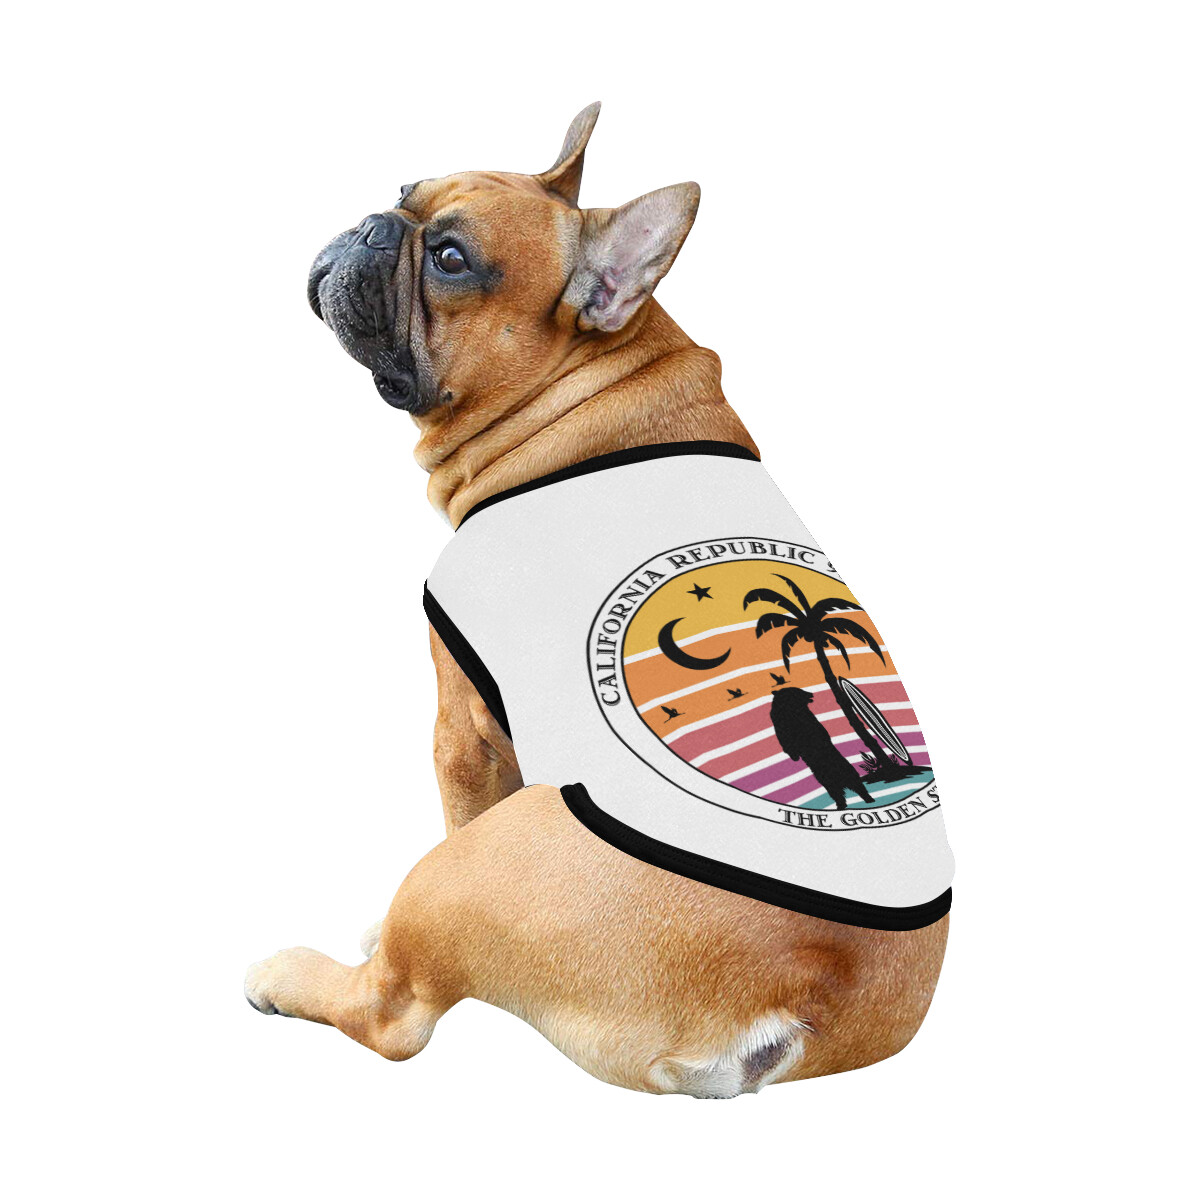 🐕 California Republic The Golden State Dog t-shirt, Dog Tank Top, Dog shirt, Dog clothes, Gifts, front back print, 7 sizes XS to 3XL dog t-shirt, white/white